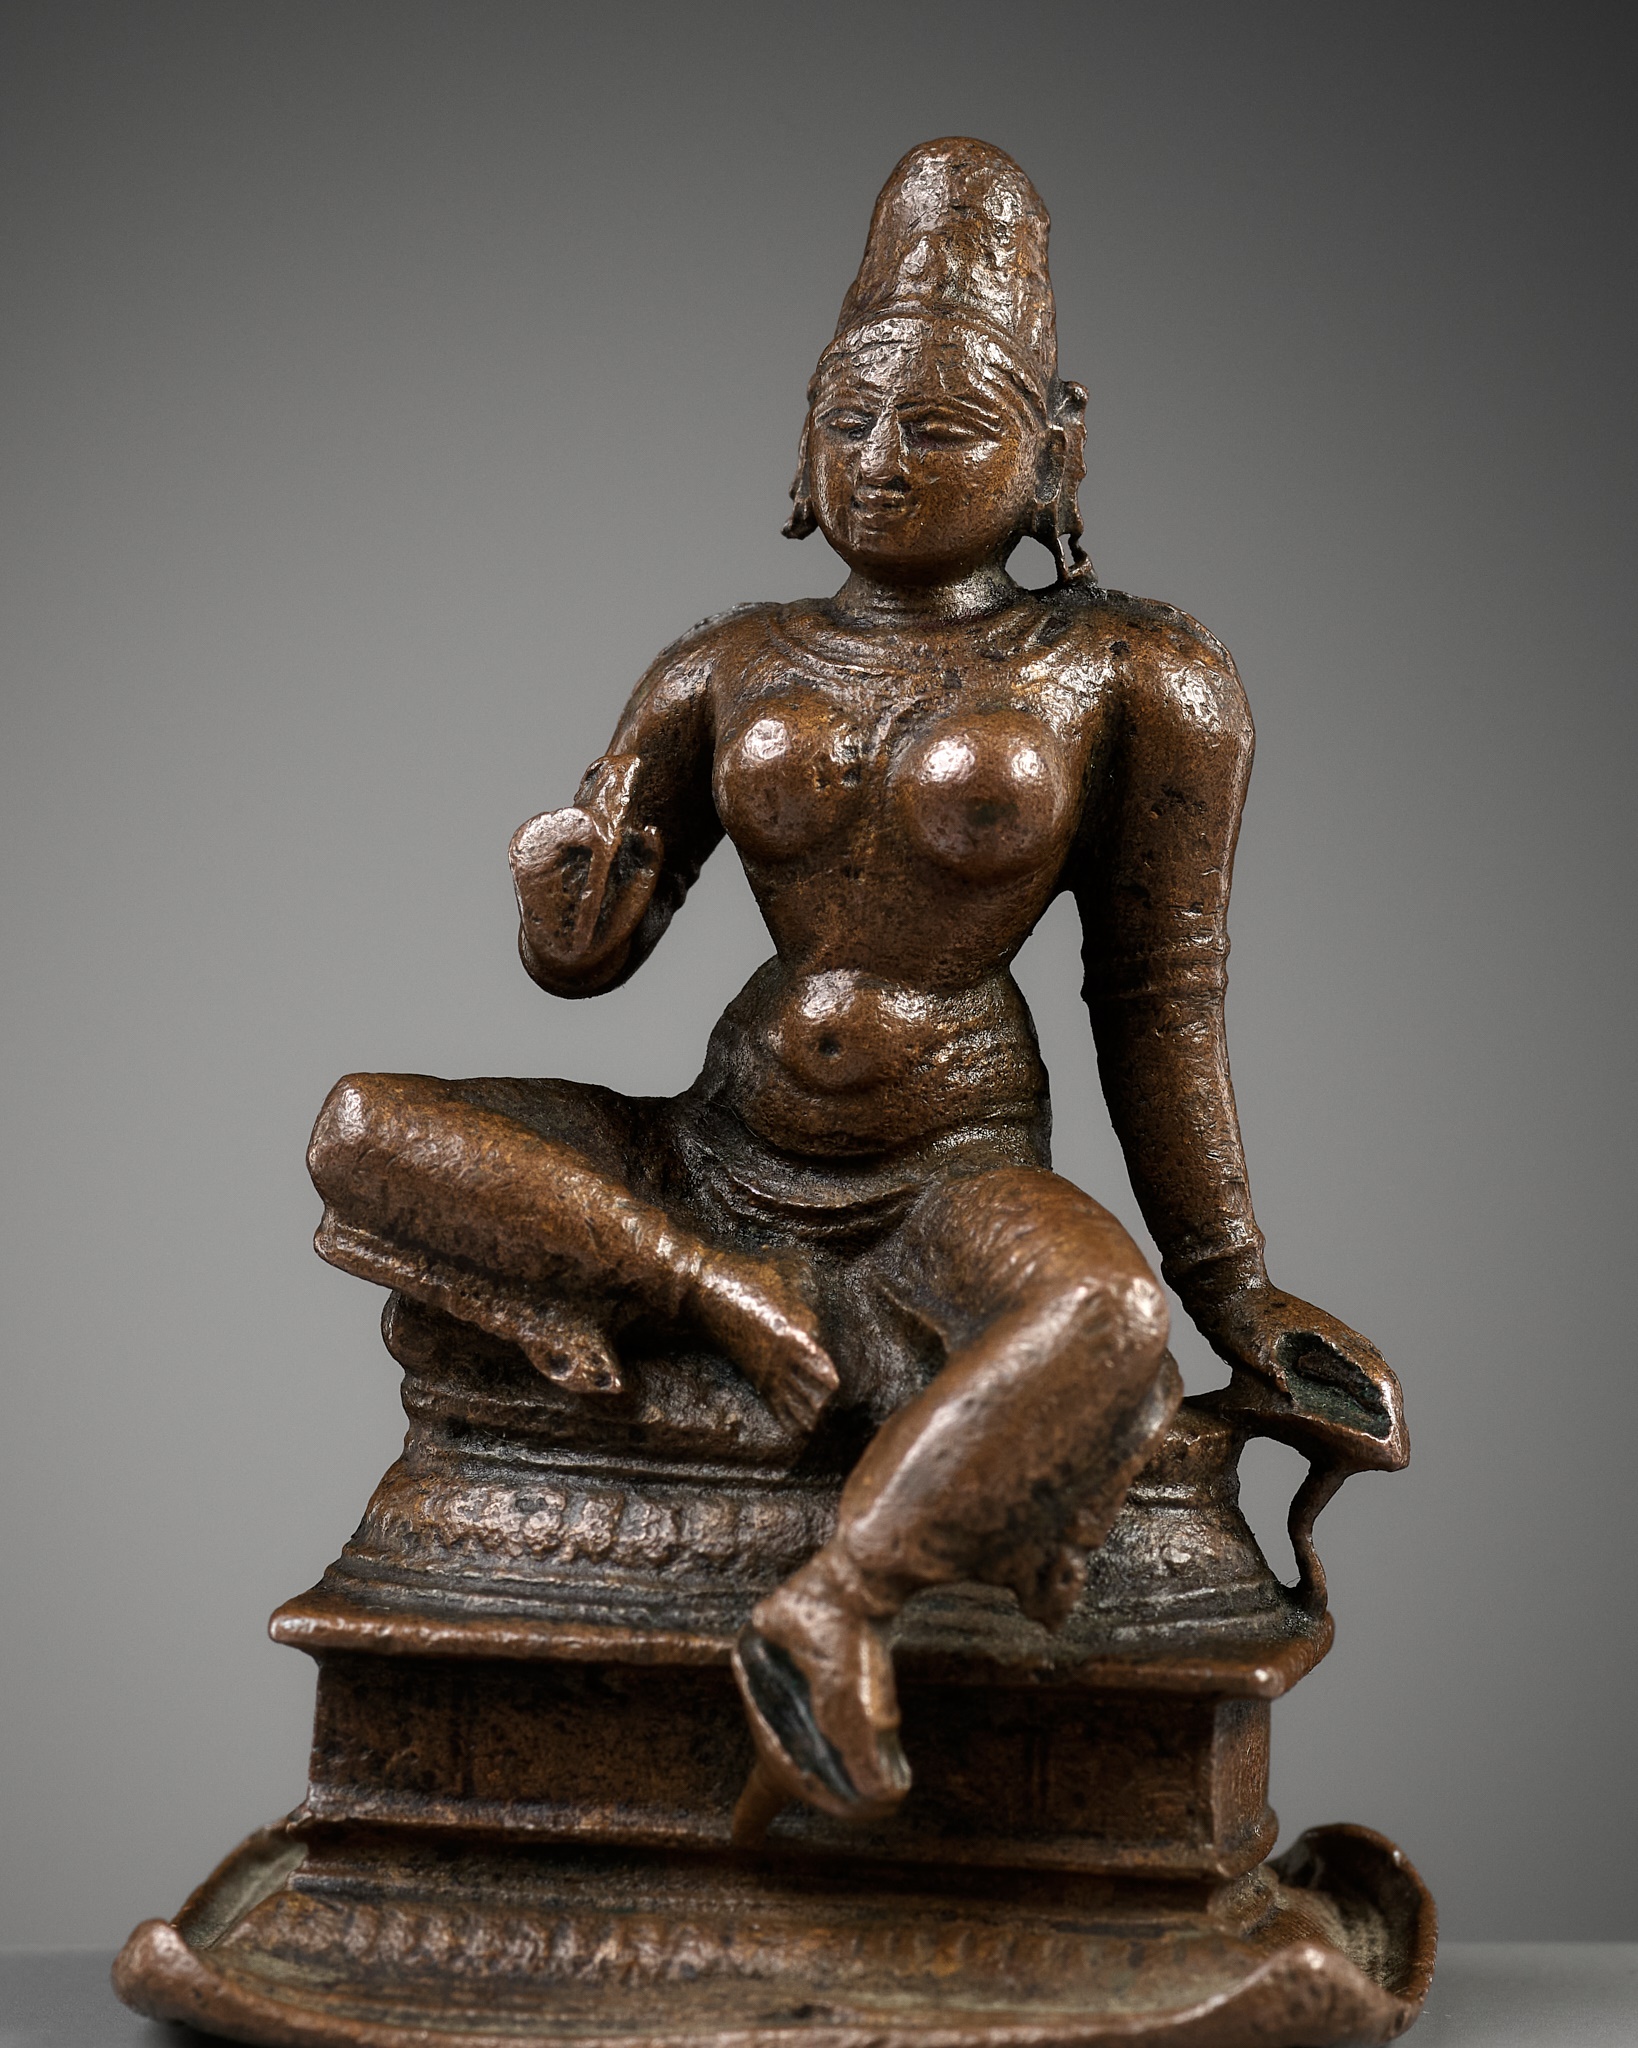 A SMALL COPPER ALLOY FIGURE OF PARVATI, LATER CHOLA